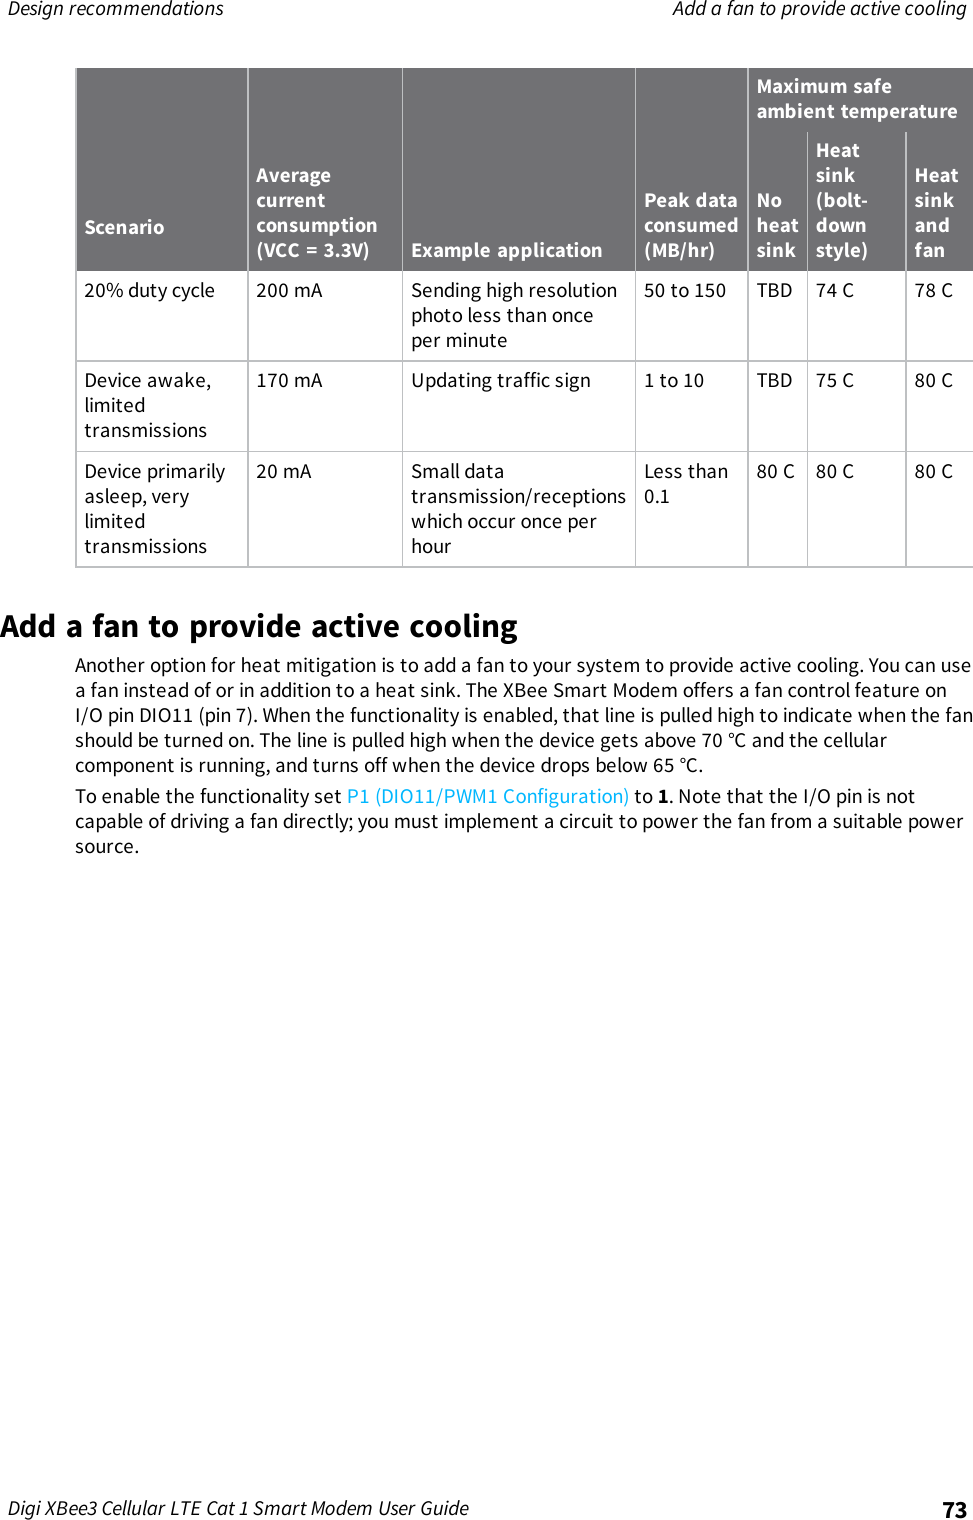 Design recommendations Add a fan to provide active coolingDigi XBee3 Cellular LTE Cat 1 Smart Modem User Guide 73ScenarioAveragecurrentconsumption(VCC = 3.3V) Example applicationPeak dataconsumed(MB/hr)Maximum safeambient temperatureNoheatsinkHeatsink(bolt-downstyle)Heatsinkandfan20% duty cycle 200 mA Sending high resolutionphoto less than onceper minute50 to 150 TBD 74 C 78 CDevice awake,limitedtransmissions170 mA Updating traffic sign 1 to 10 TBD 75 C 80 CDevice primarilyasleep, verylimitedtransmissions20 mA Small datatransmission/receptionswhich occur once perhourLess than0.180 C 80 C 80 CAdd a fan to provide active coolingAnother option for heat mitigation is to add a fan to your system to provide active cooling. You can usea fan instead of or in addition to a heat sink. The XBee Smart Modem offers a fan control feature onI/O pin DIO11 (pin 7). When the functionality is enabled, that line is pulled high to indicate when the fanshould be turned on. The line is pulled high when the device gets above 70 °C and the cellularcomponent is running, and turns off when the device drops below 65 °C.To enable the functionality set P1 (DIO11/PWM1 Configuration) to 1. Note that the I/O pin is notcapable of driving a fan directly; you must implement a circuit to power the fan from a suitable powersource.